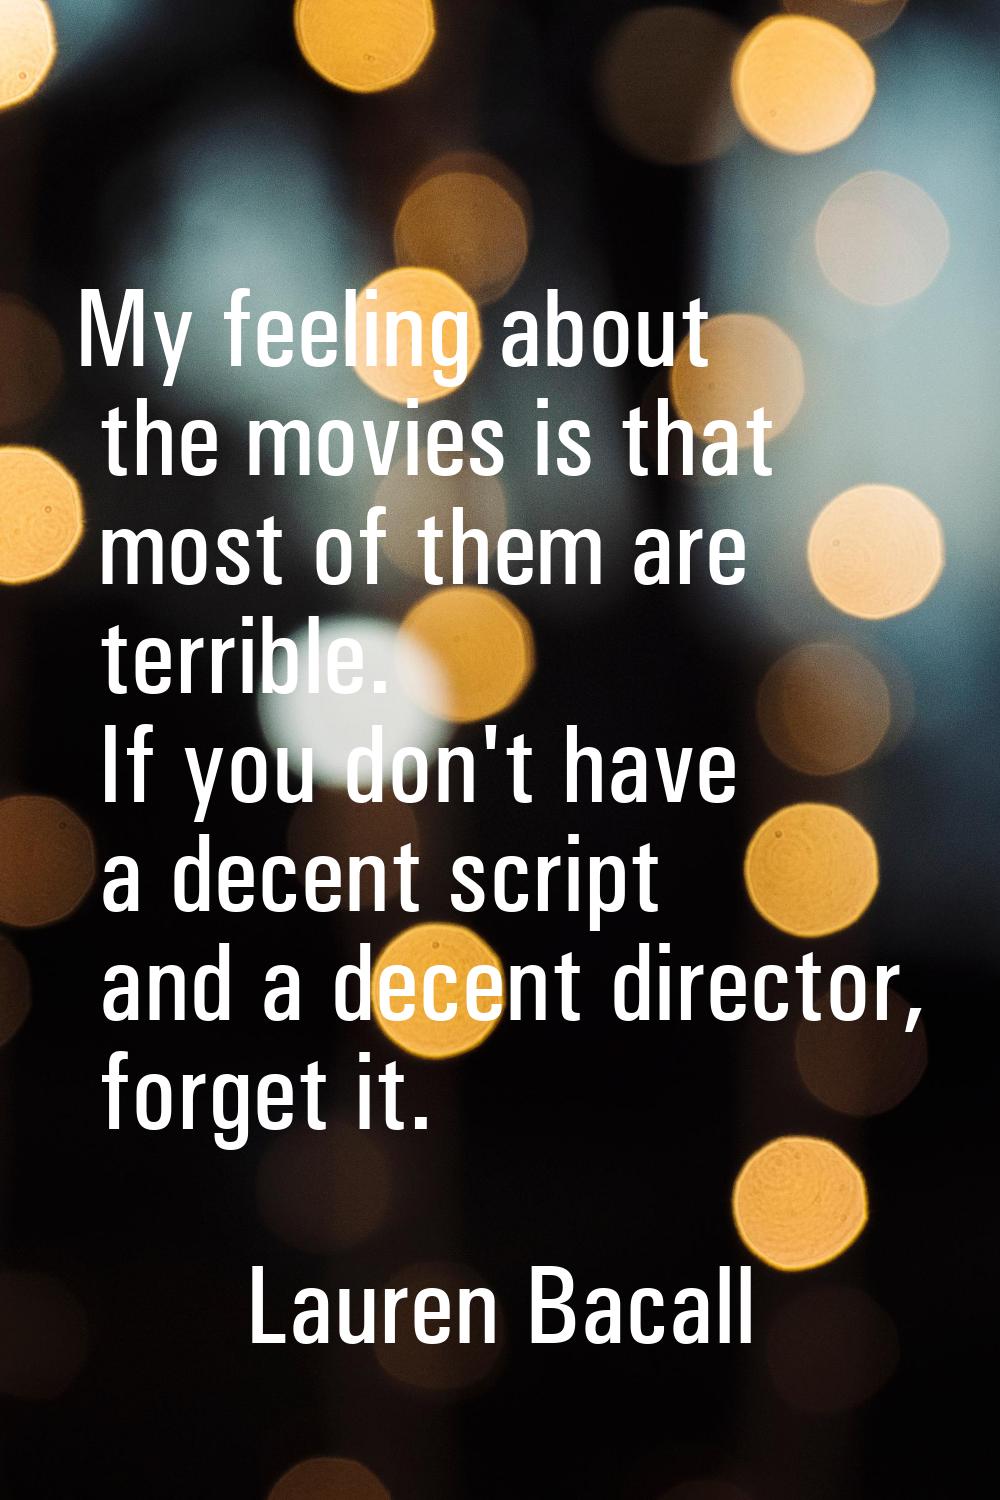 My feeling about the movies is that most of them are terrible. If you don't have a decent script an